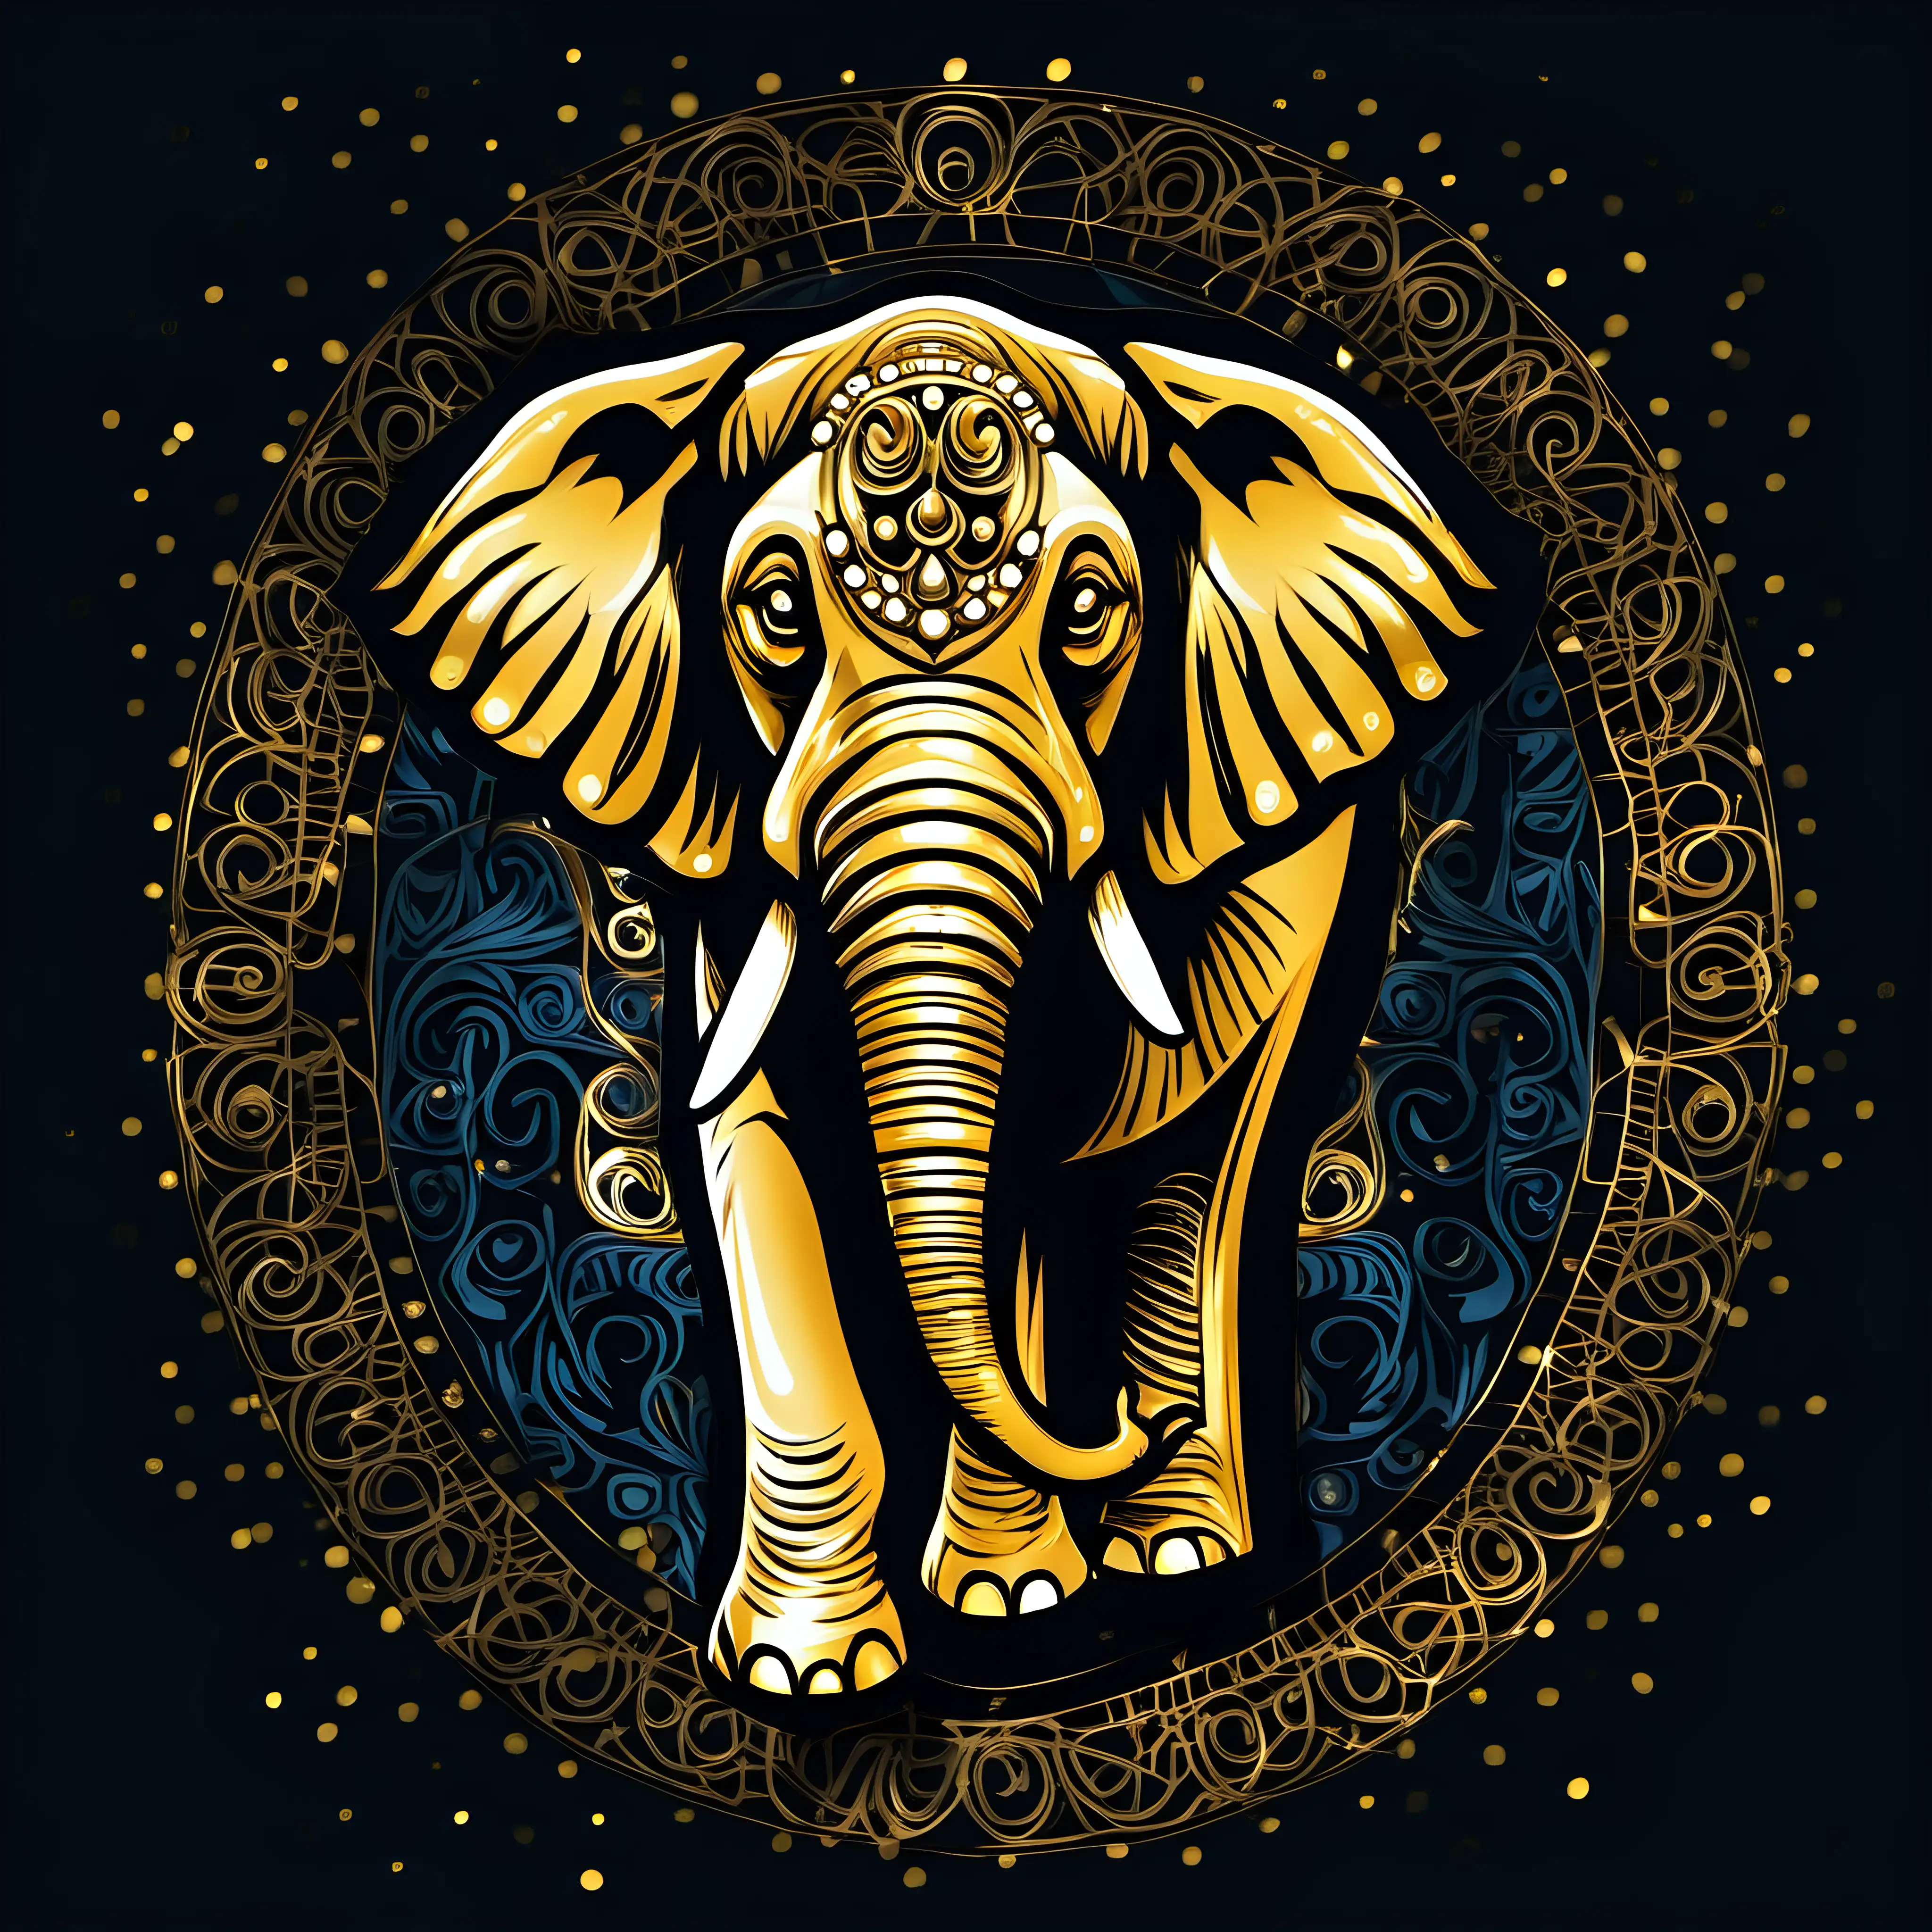 Create a t-shirt design, suitable for a black t-shirt, flat black background, of an elephant that is gold colored with accents of light blue